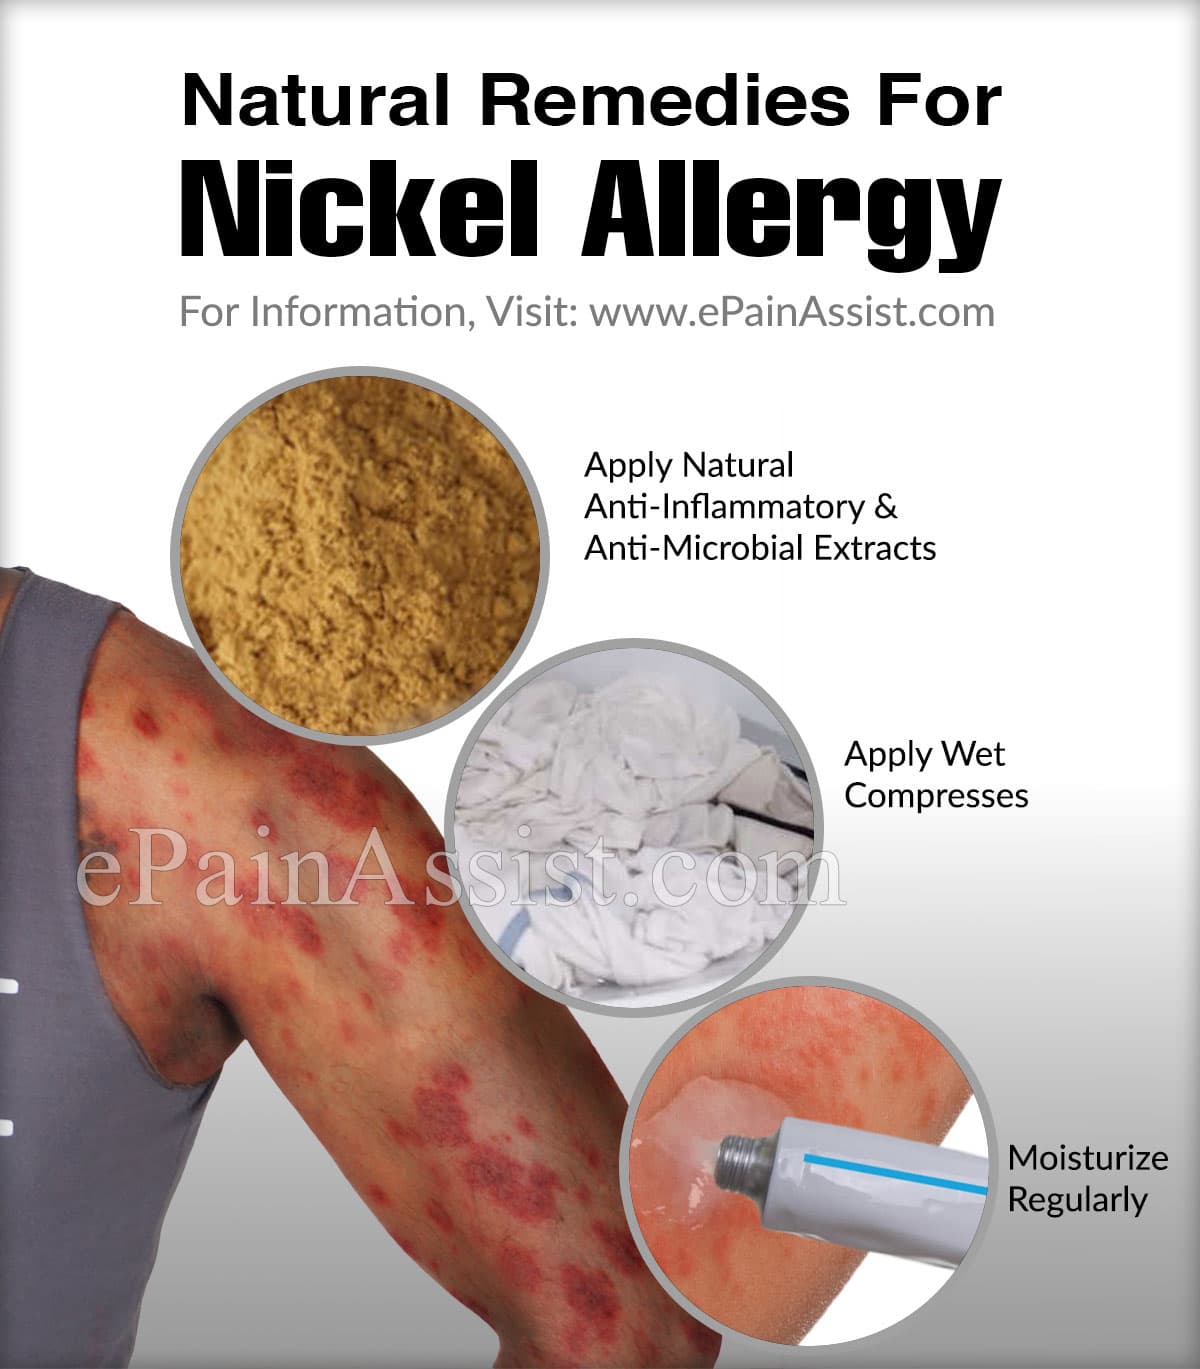 Can Nickel Allergy Go Away On Its Own &  What Are It